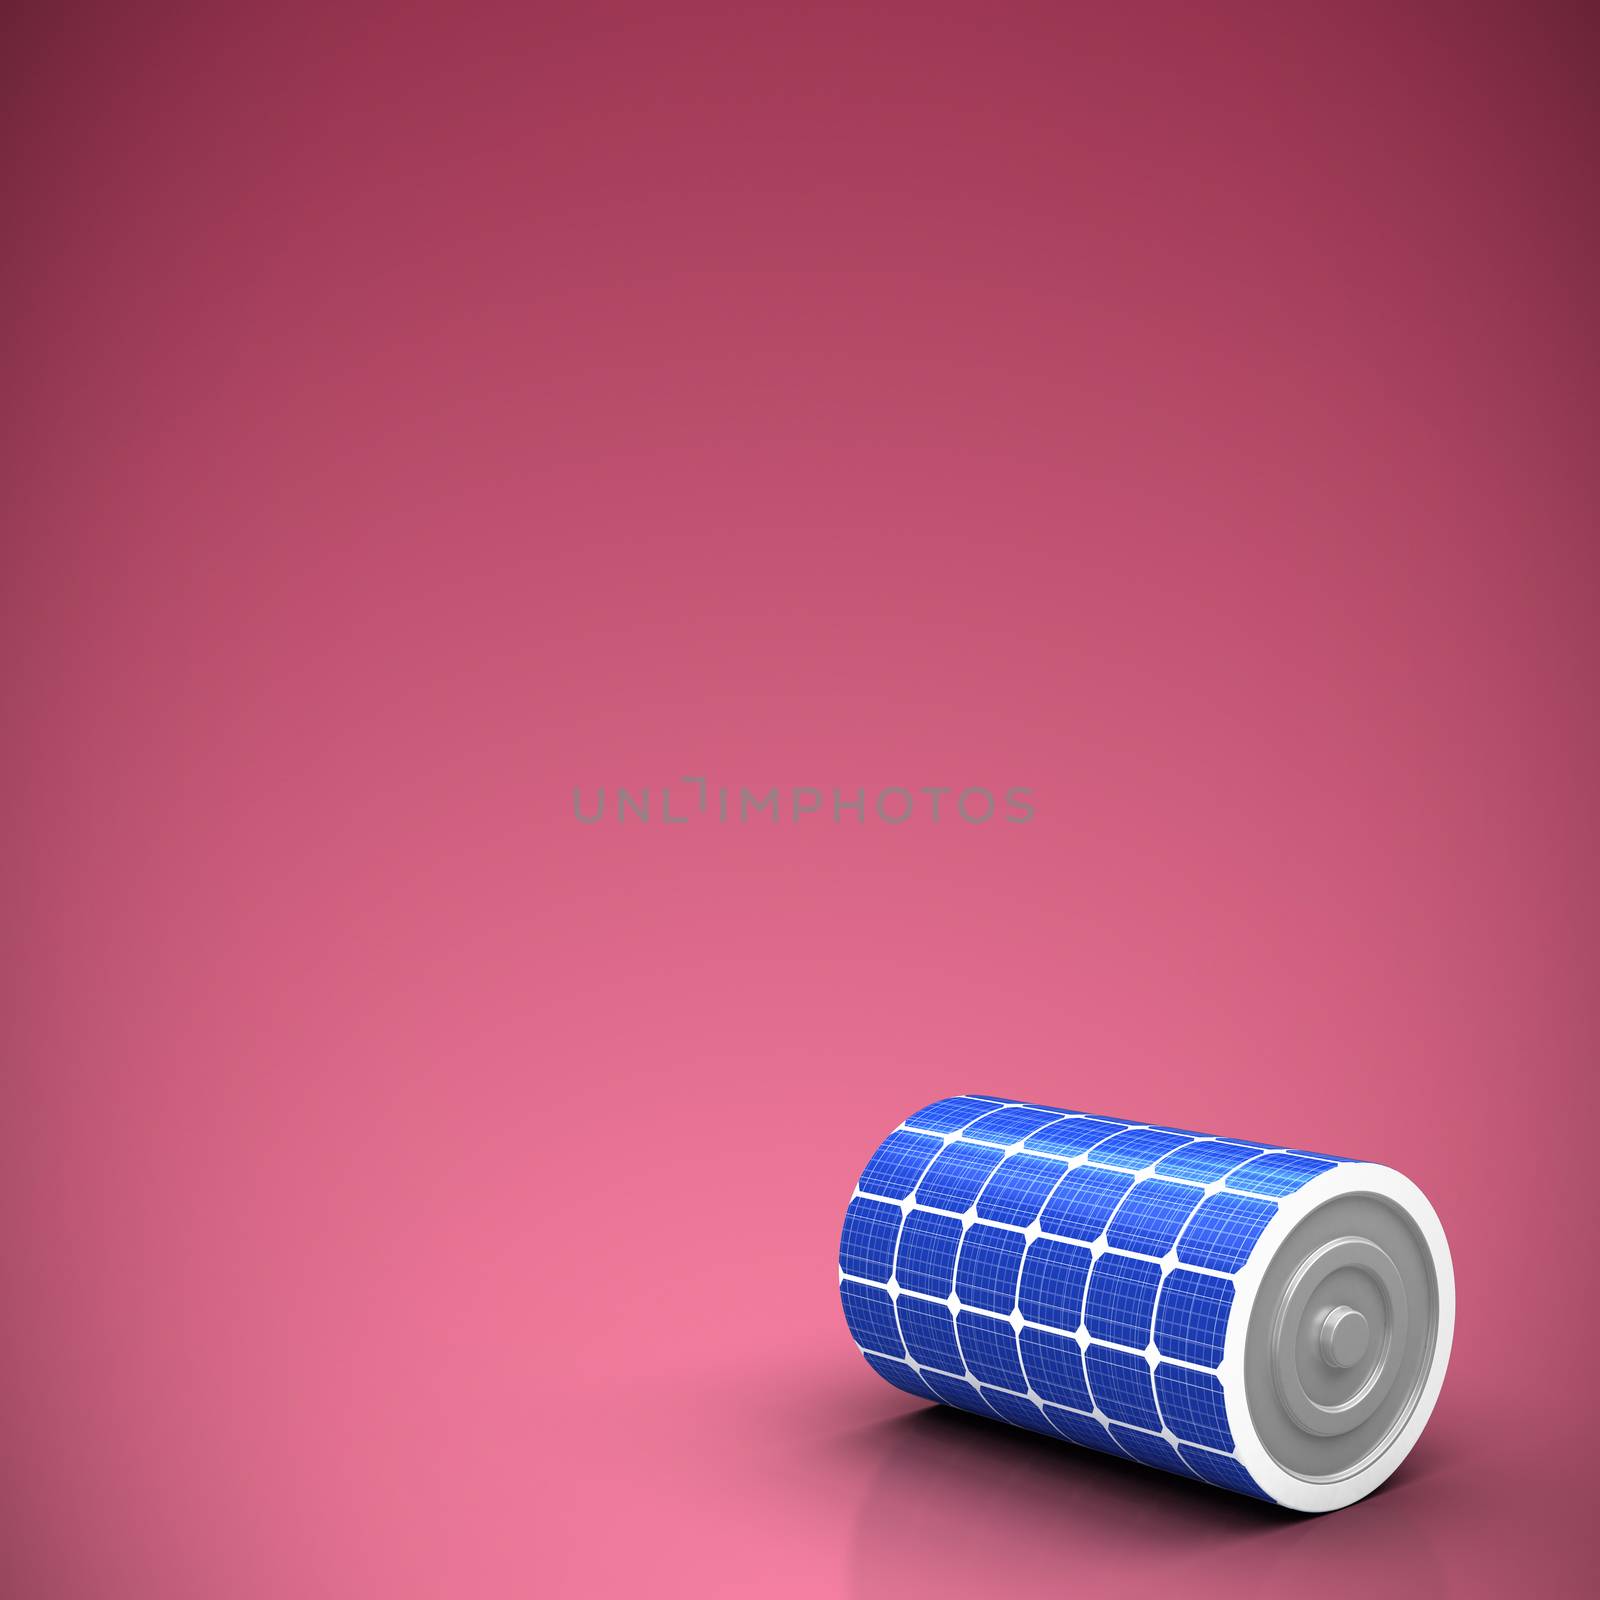 High angle view of 3d solar battery against red and white background